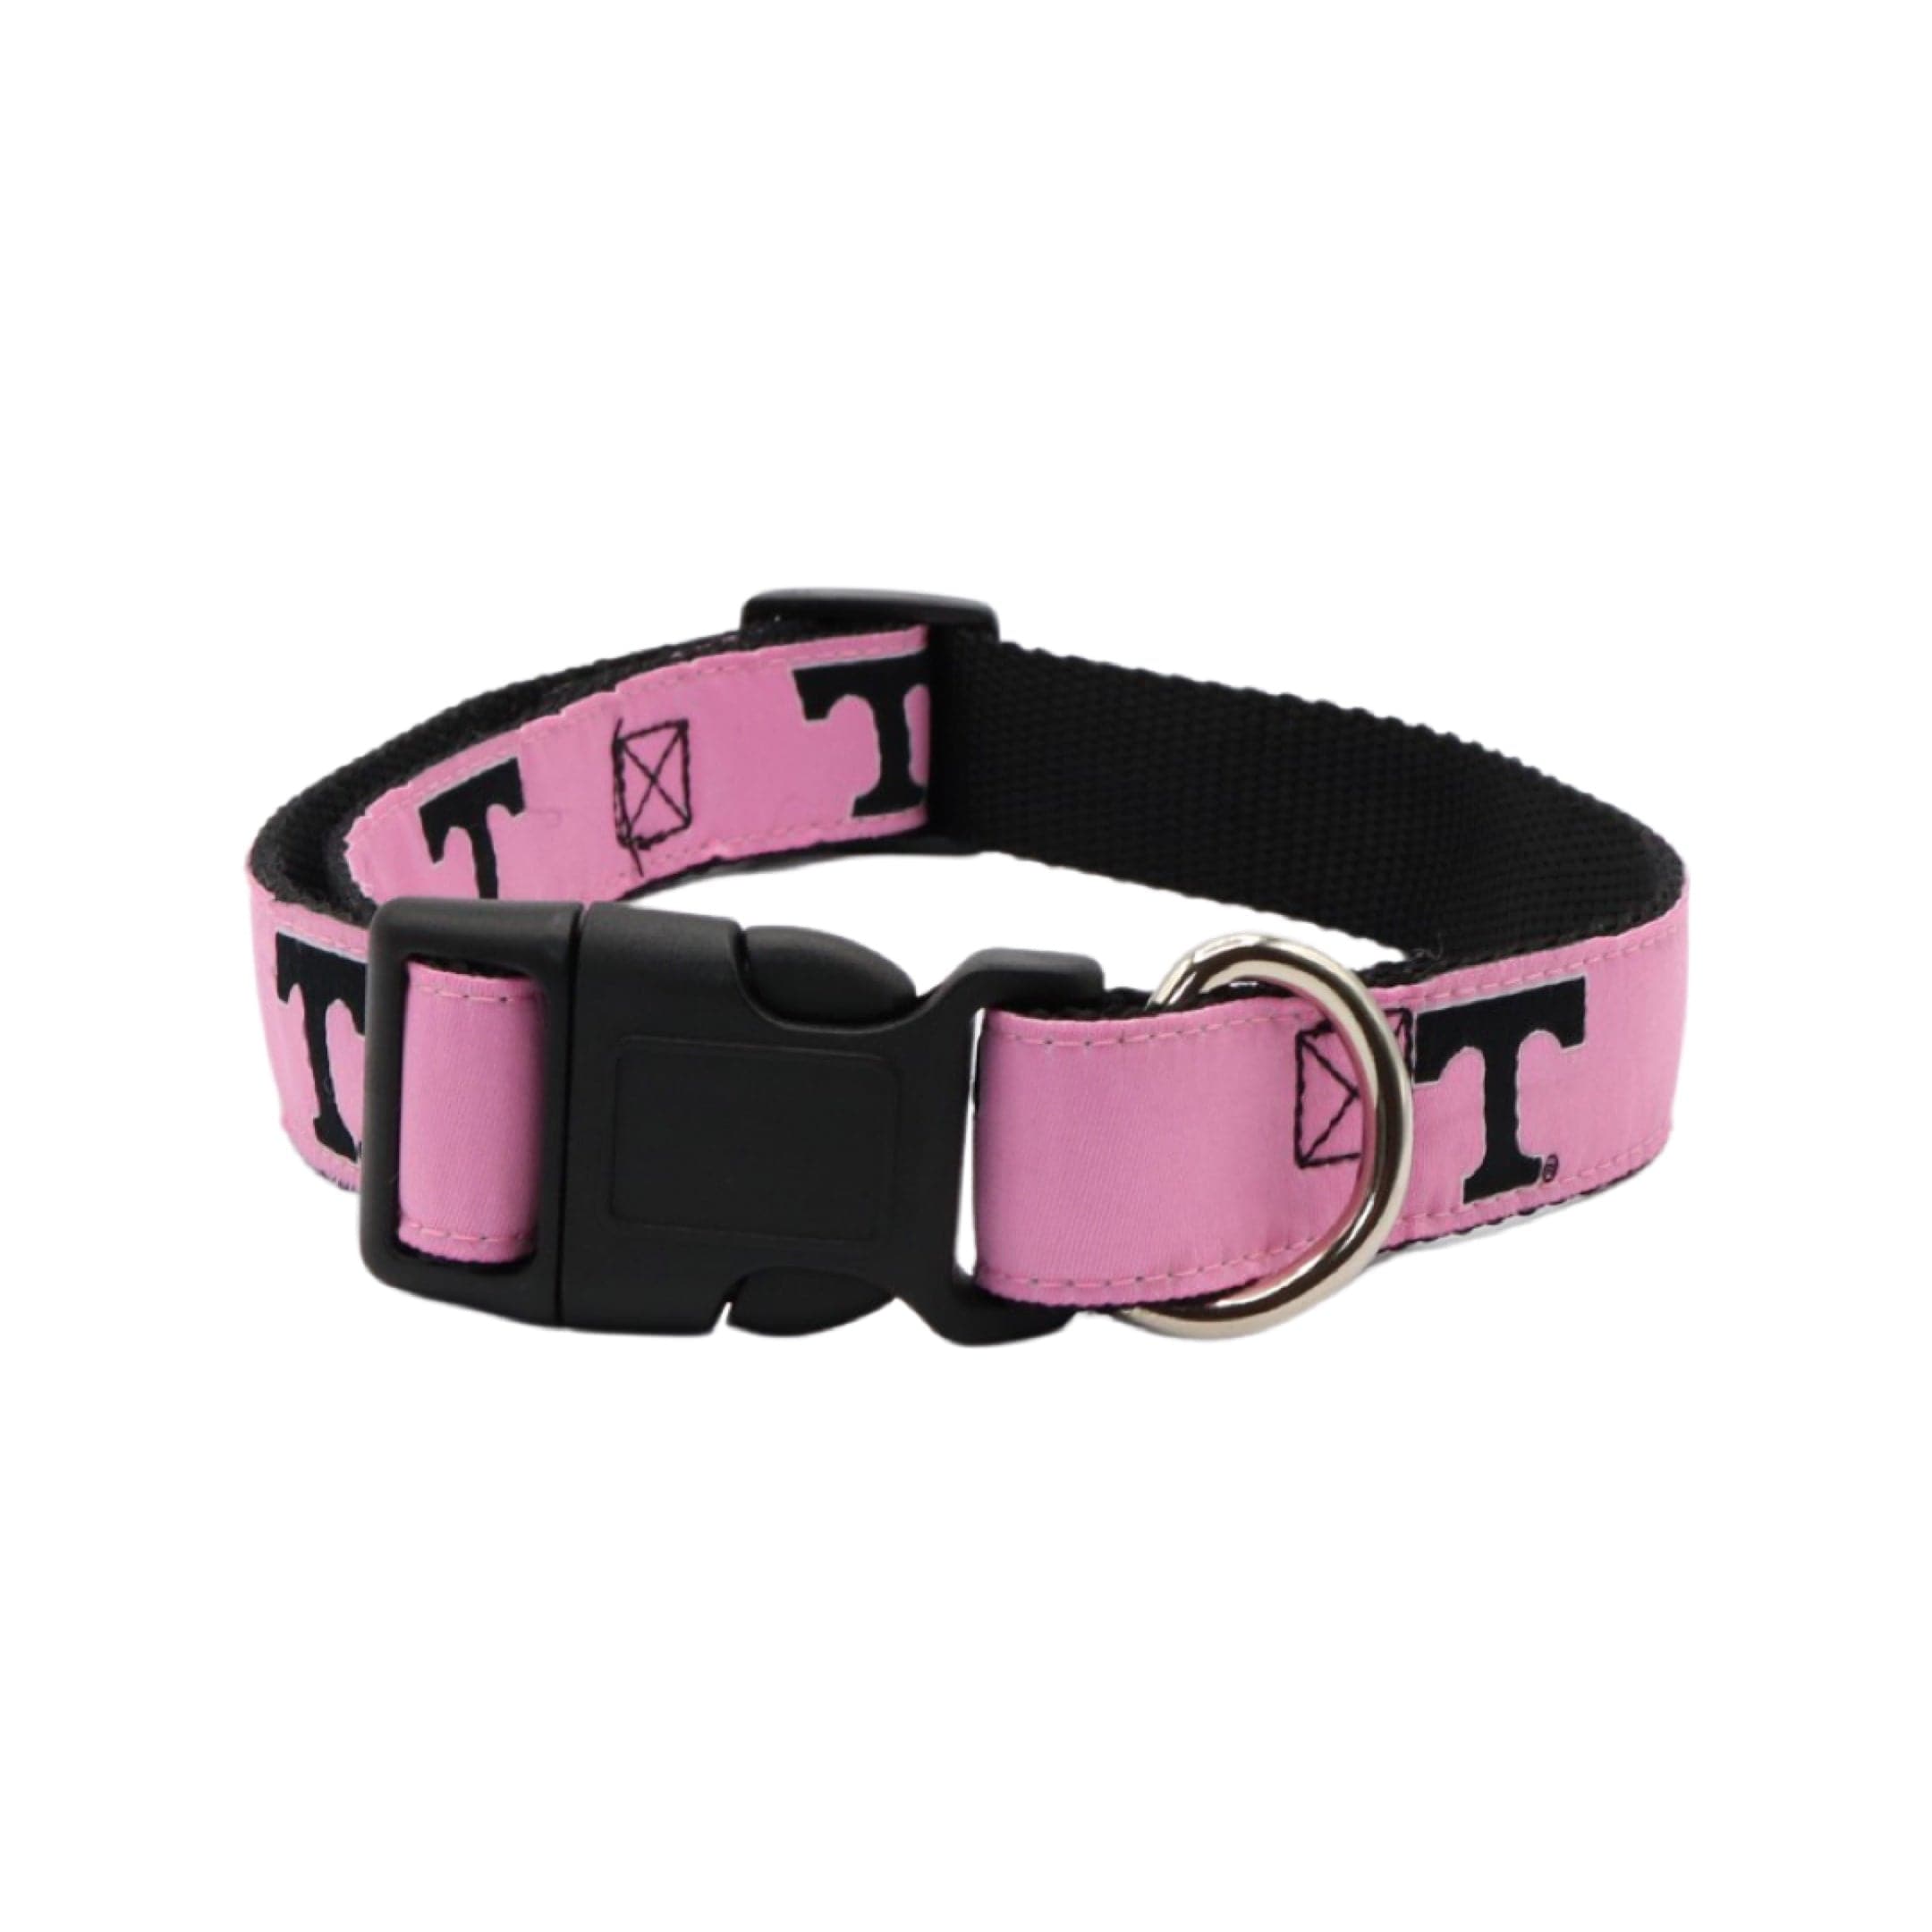 UNIVERSITY OF TENNESSEE 'PINK' DOG COLLAR